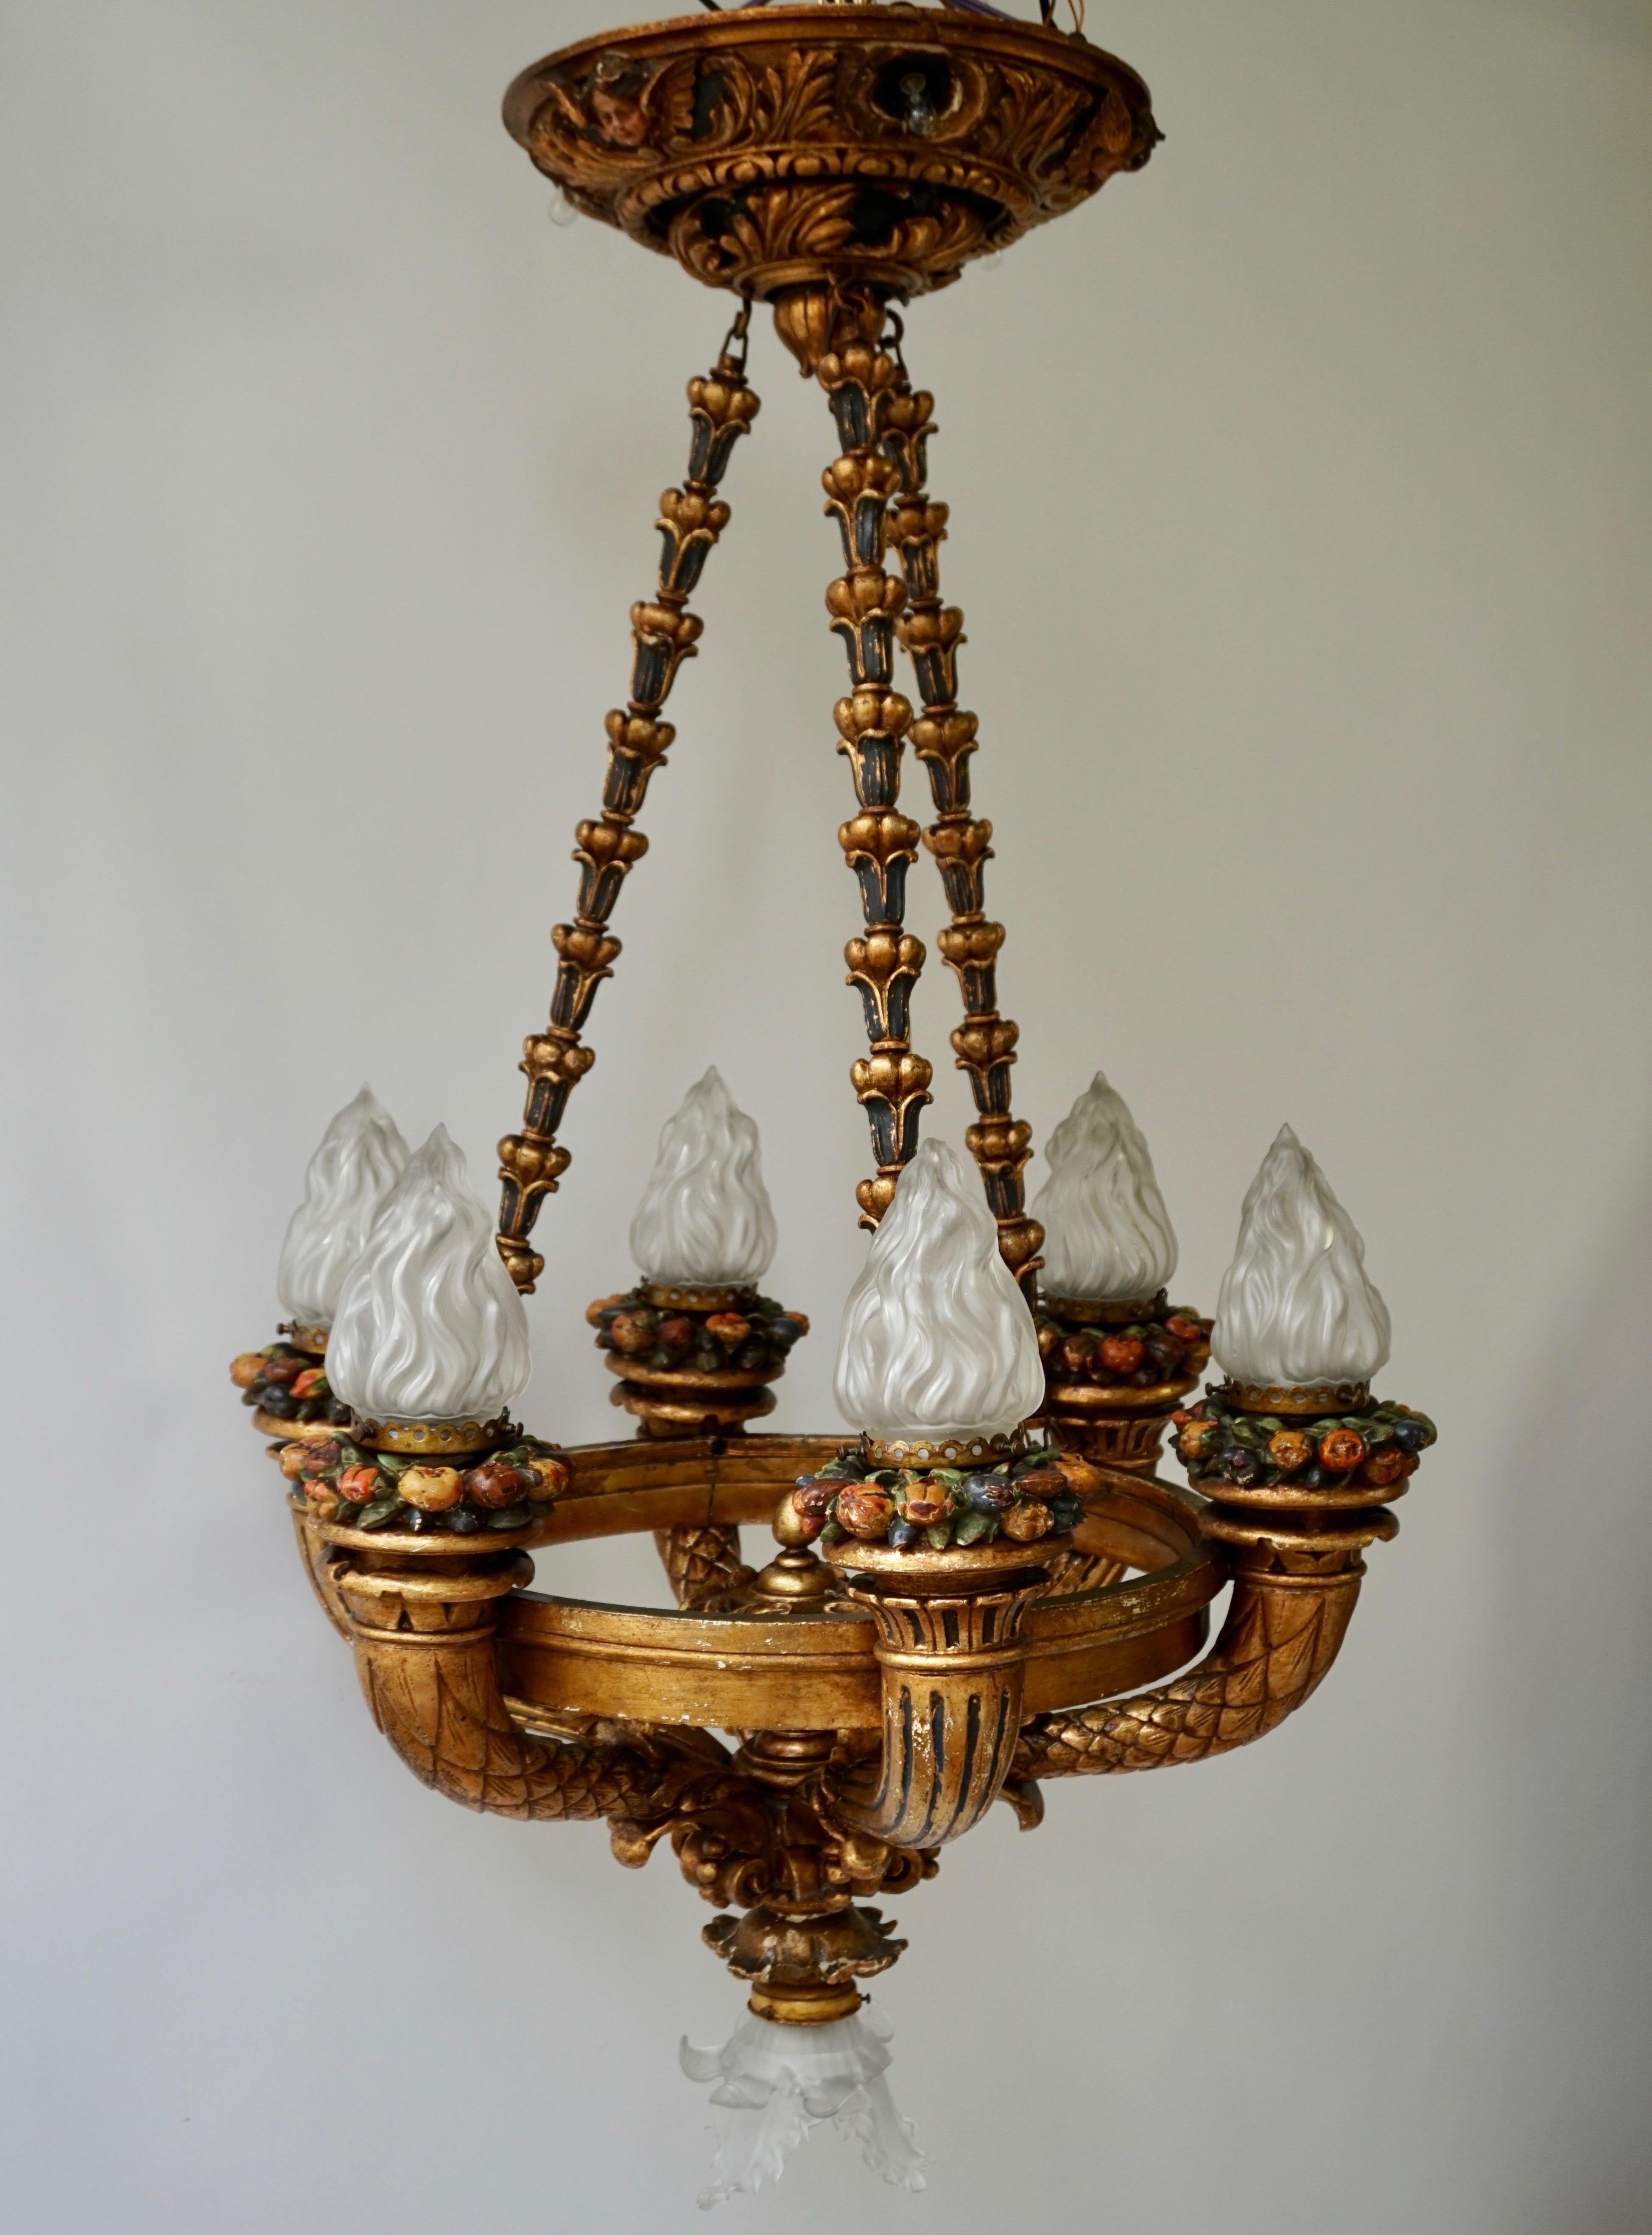 Unique Italian gilt wooden chandelier with seven lights, cherubs and painted fruit. Fine gilded wooden leaves and six beautiful angels make this rococo chandelier unique. The round giltwood ceiling plate is decorated with three painted cherubs and